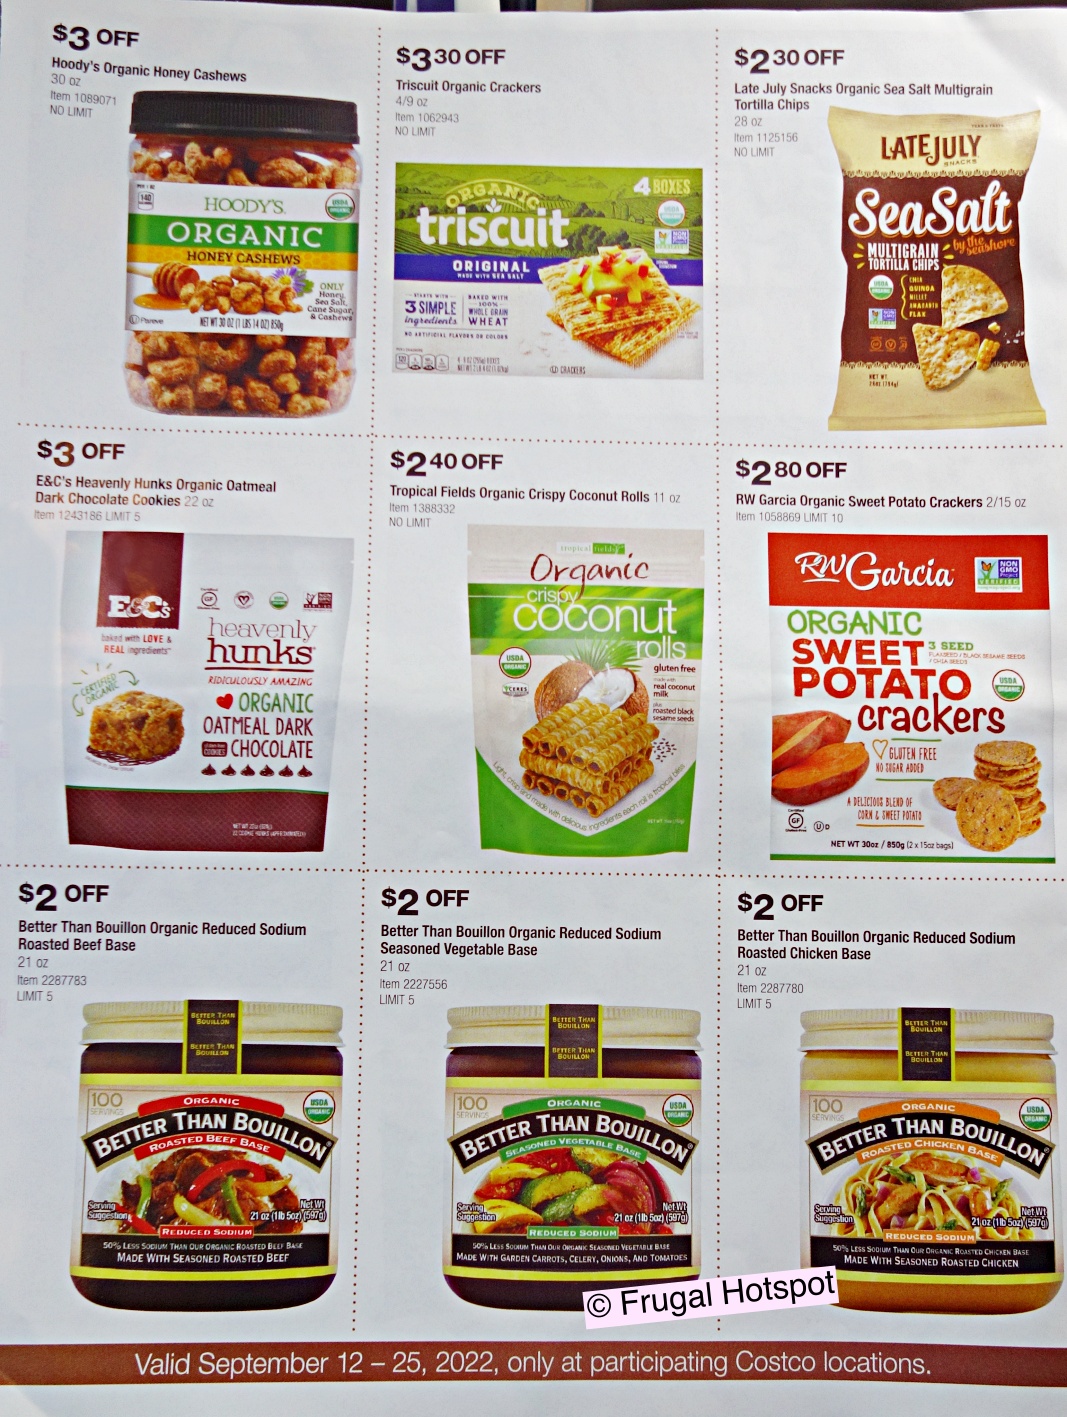 Costco Organic Coupon Book September 2022 | Page 2